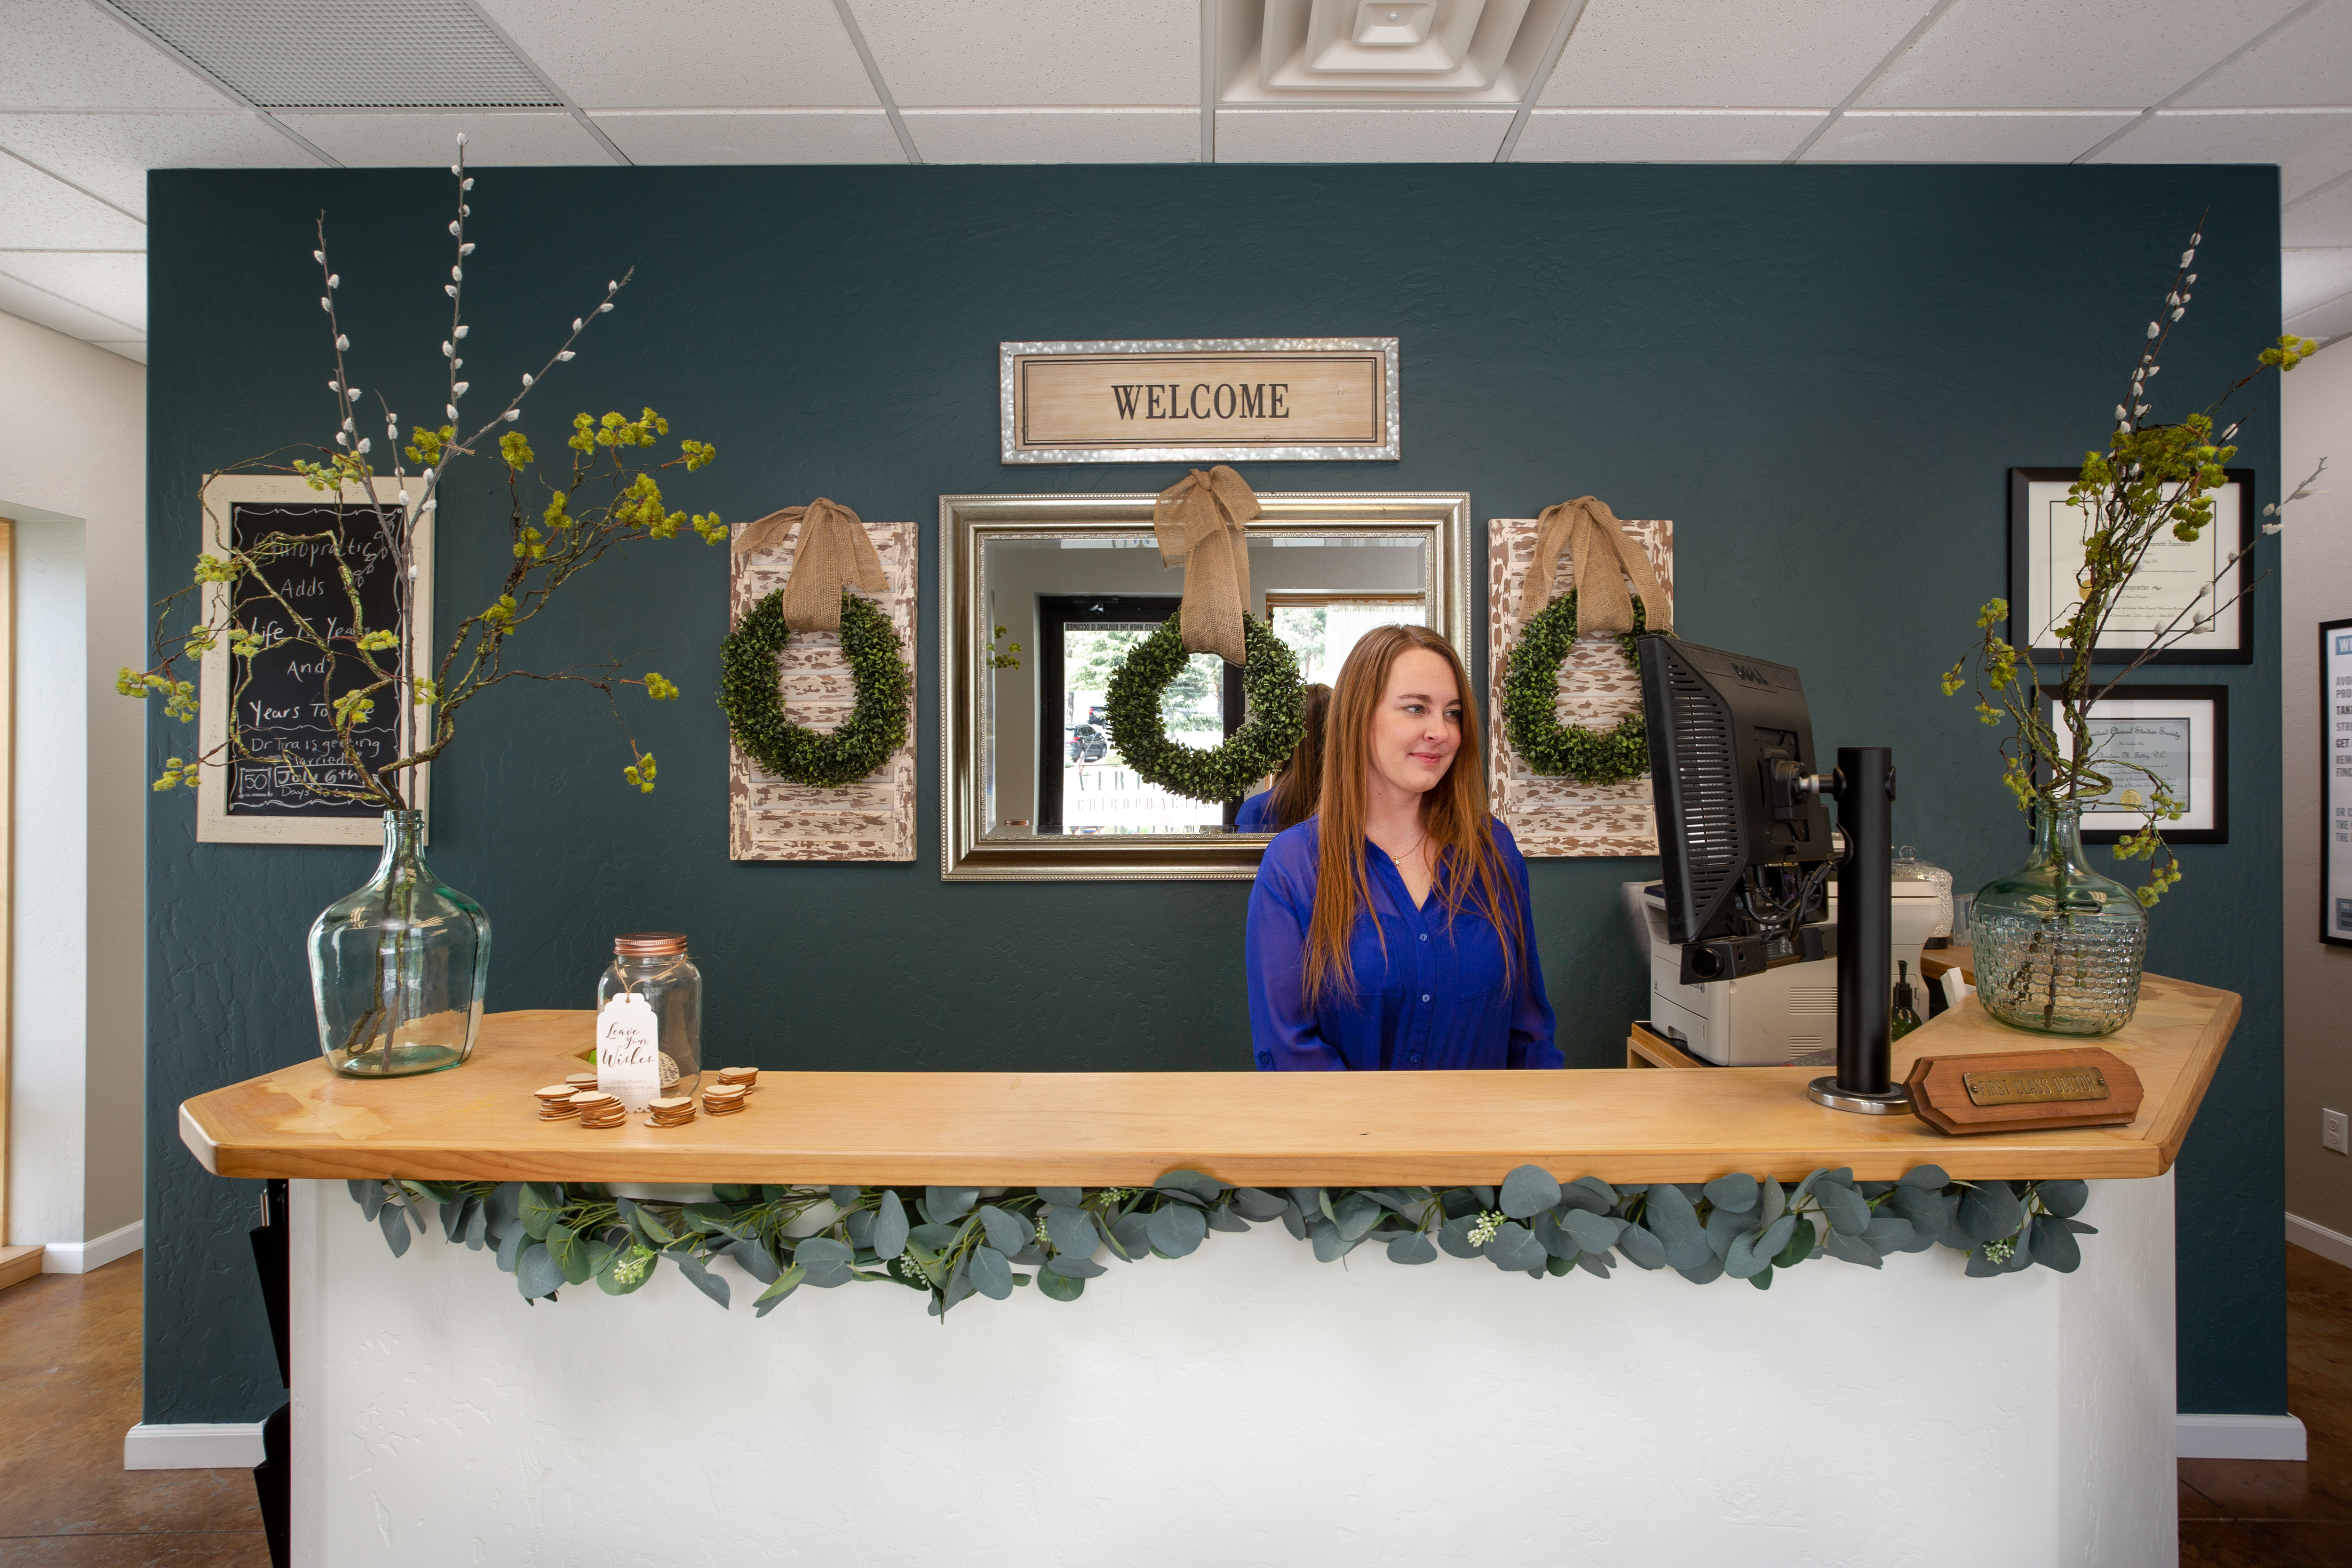 durango co chiropractic office, located near downtown durango, north main, US 550, welcoming office, teal, Dr. Tina Fettig, Gonstead Chiropractor